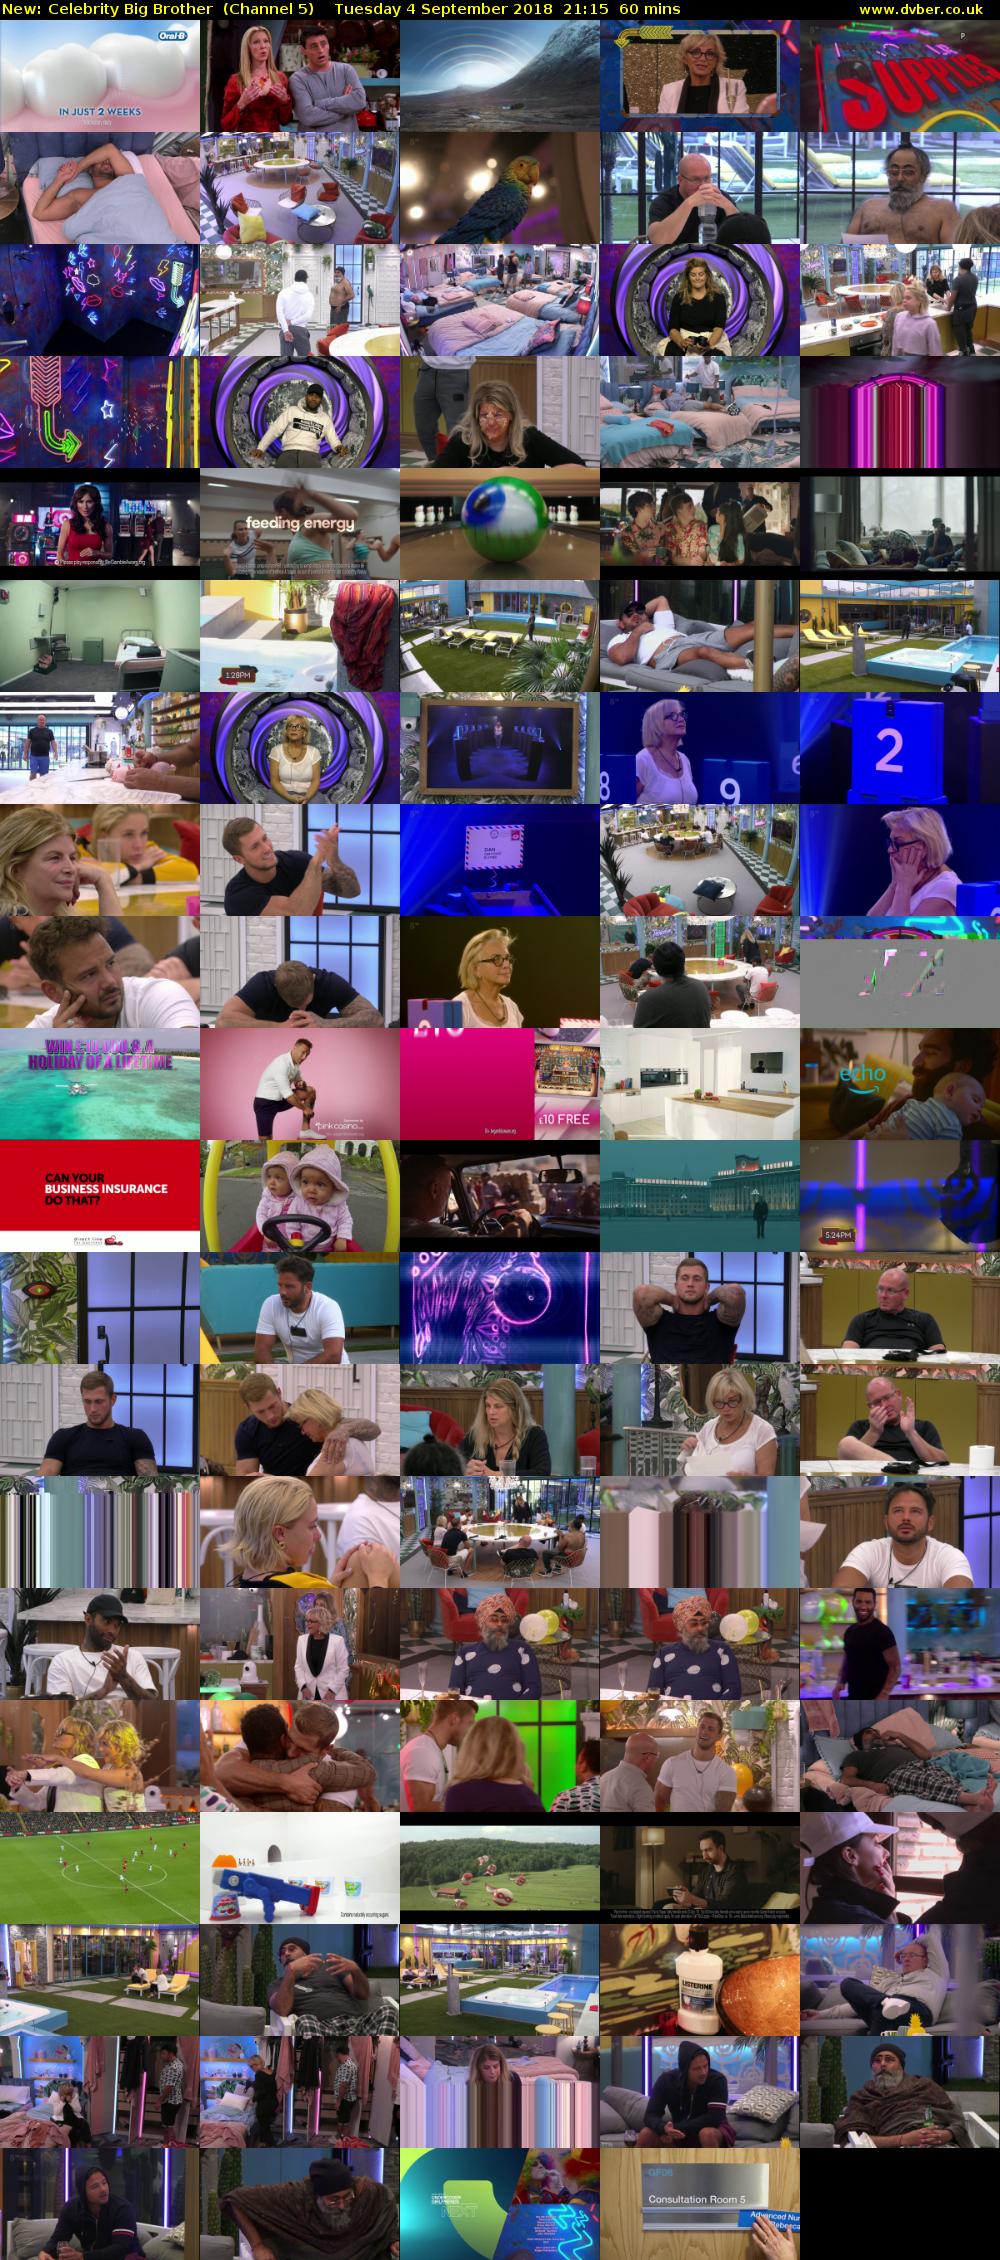 Celebrity Big Brother (Channel 5) Tuesday 4 September 2018 21:15 - 22:15